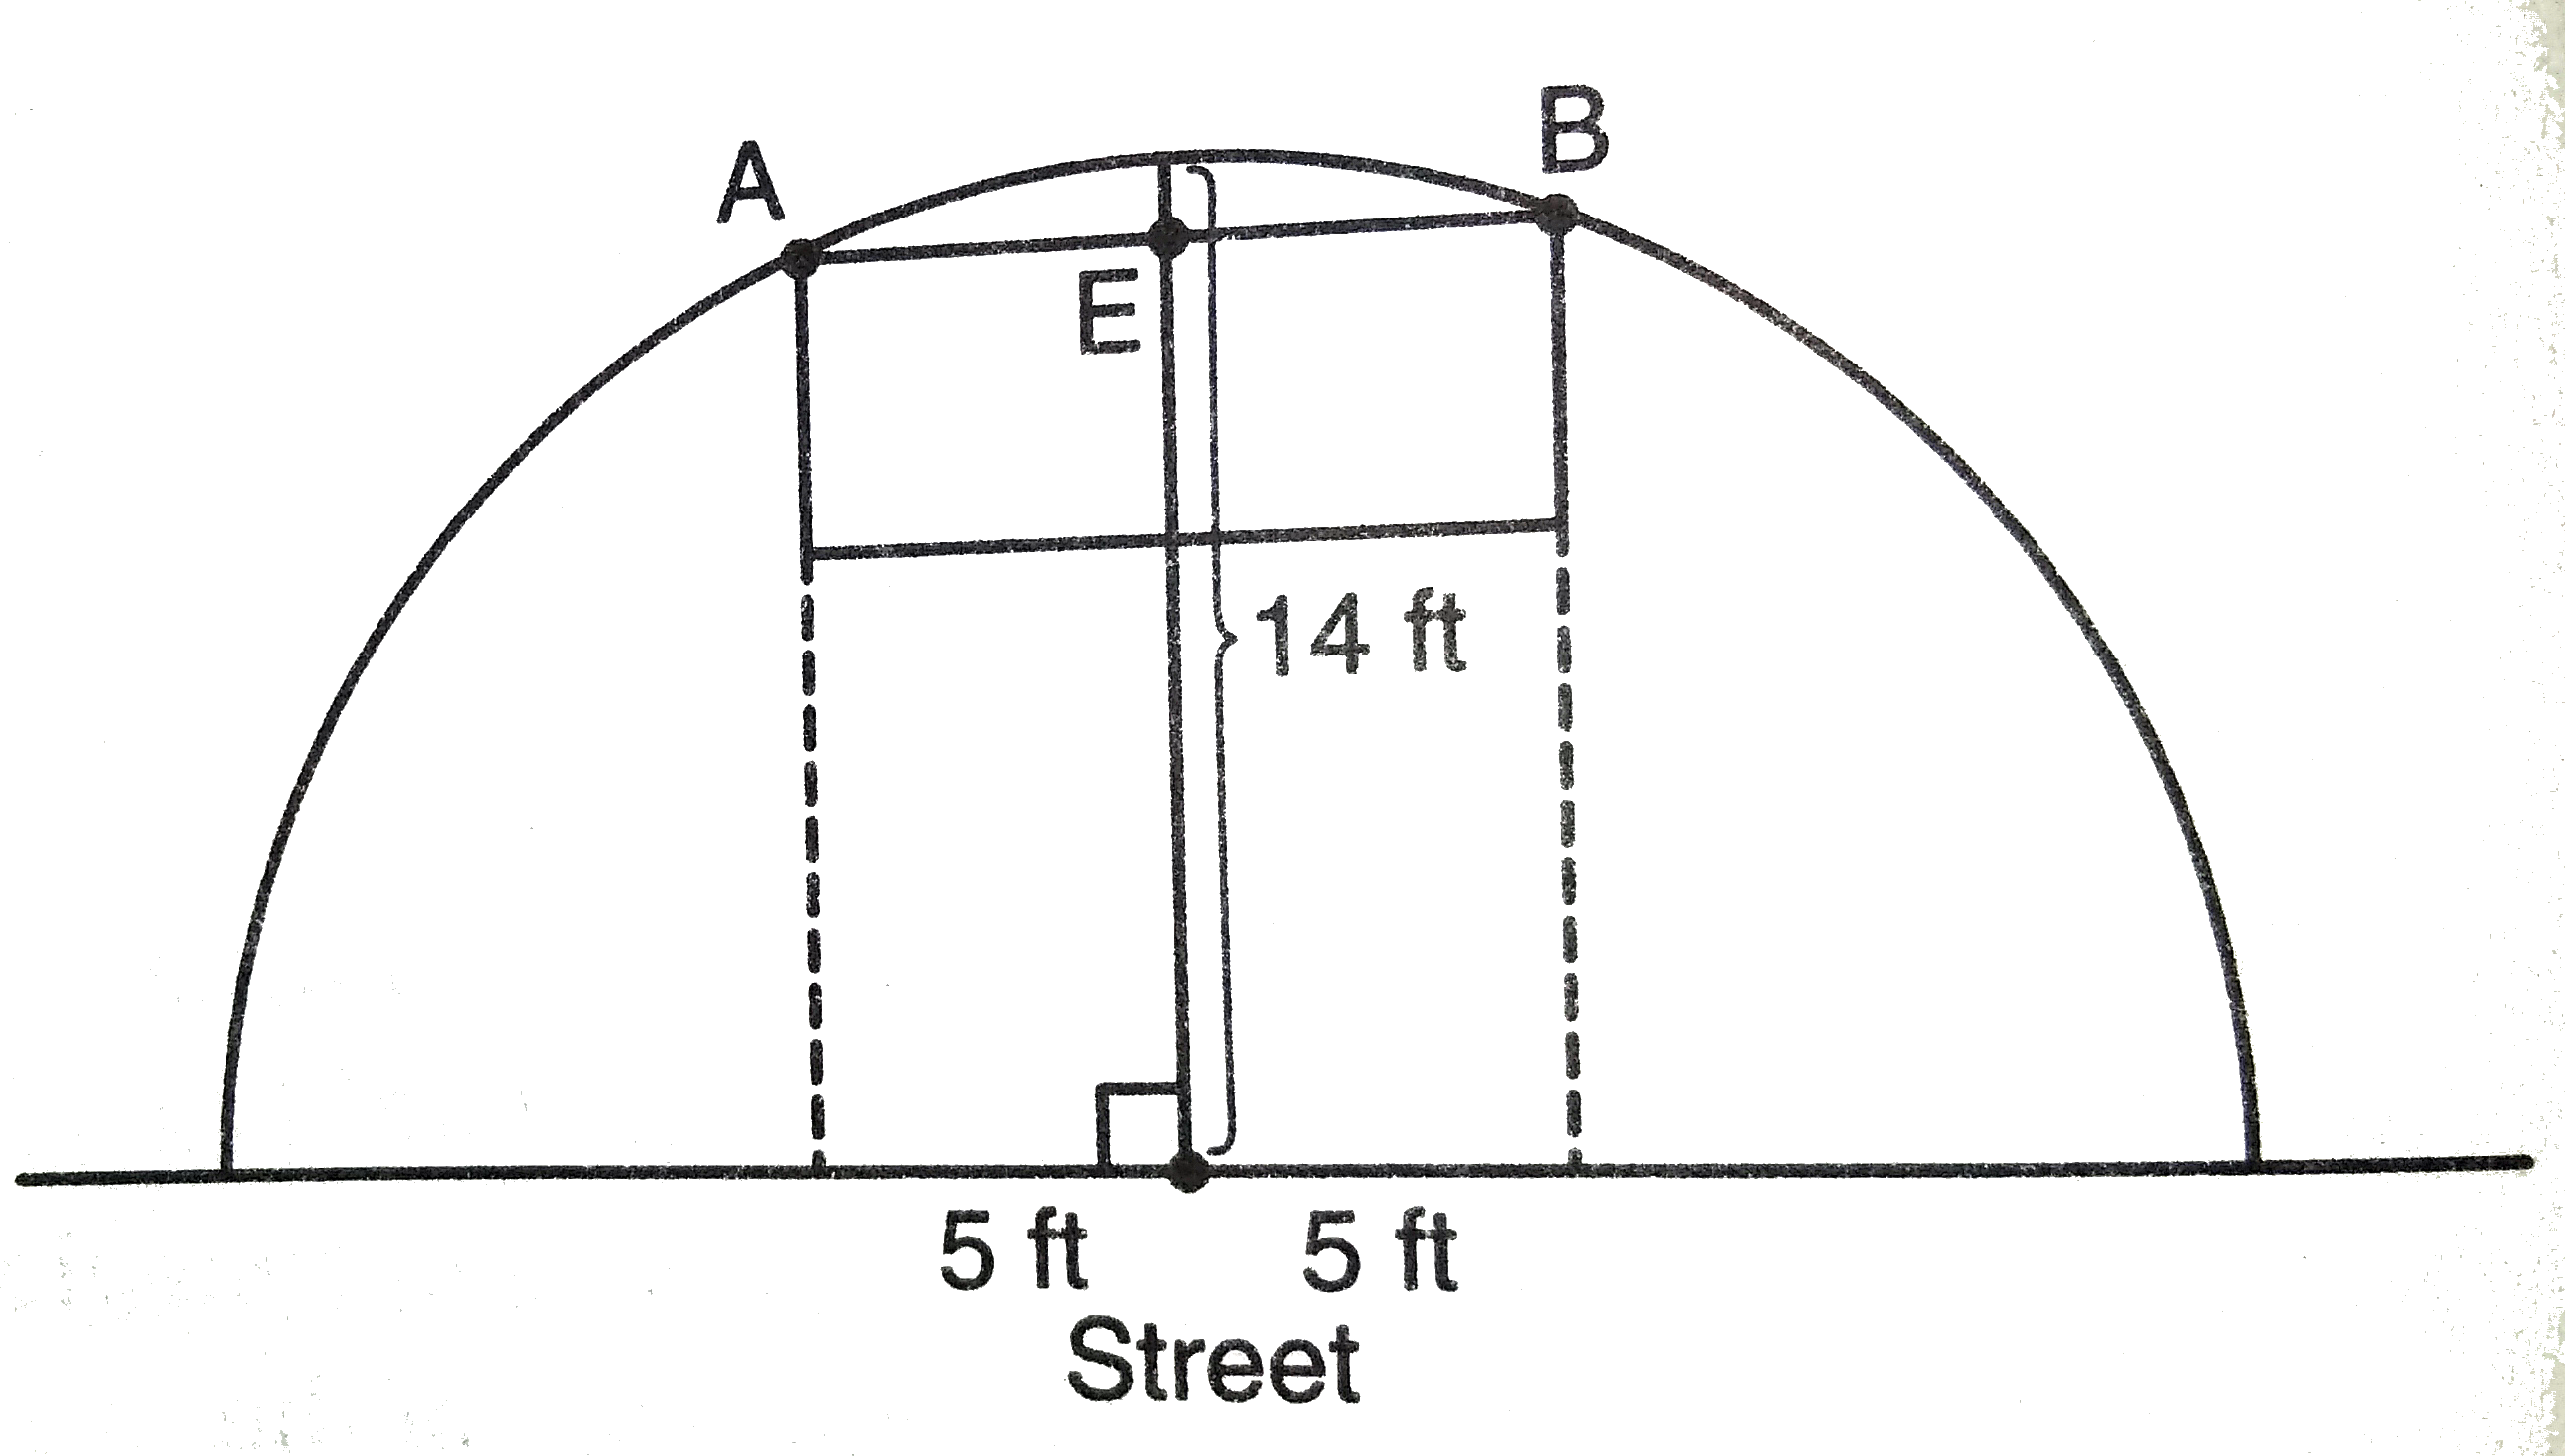 The diagram above shows a semicircular arch over a street that has a radius of 14 feet. A banner is attached to the arch at points A and B, such that AE=EB=5 feets. How many feet above the ground are these points of attachment for the banner, correct to the nearest tenth of a foot?